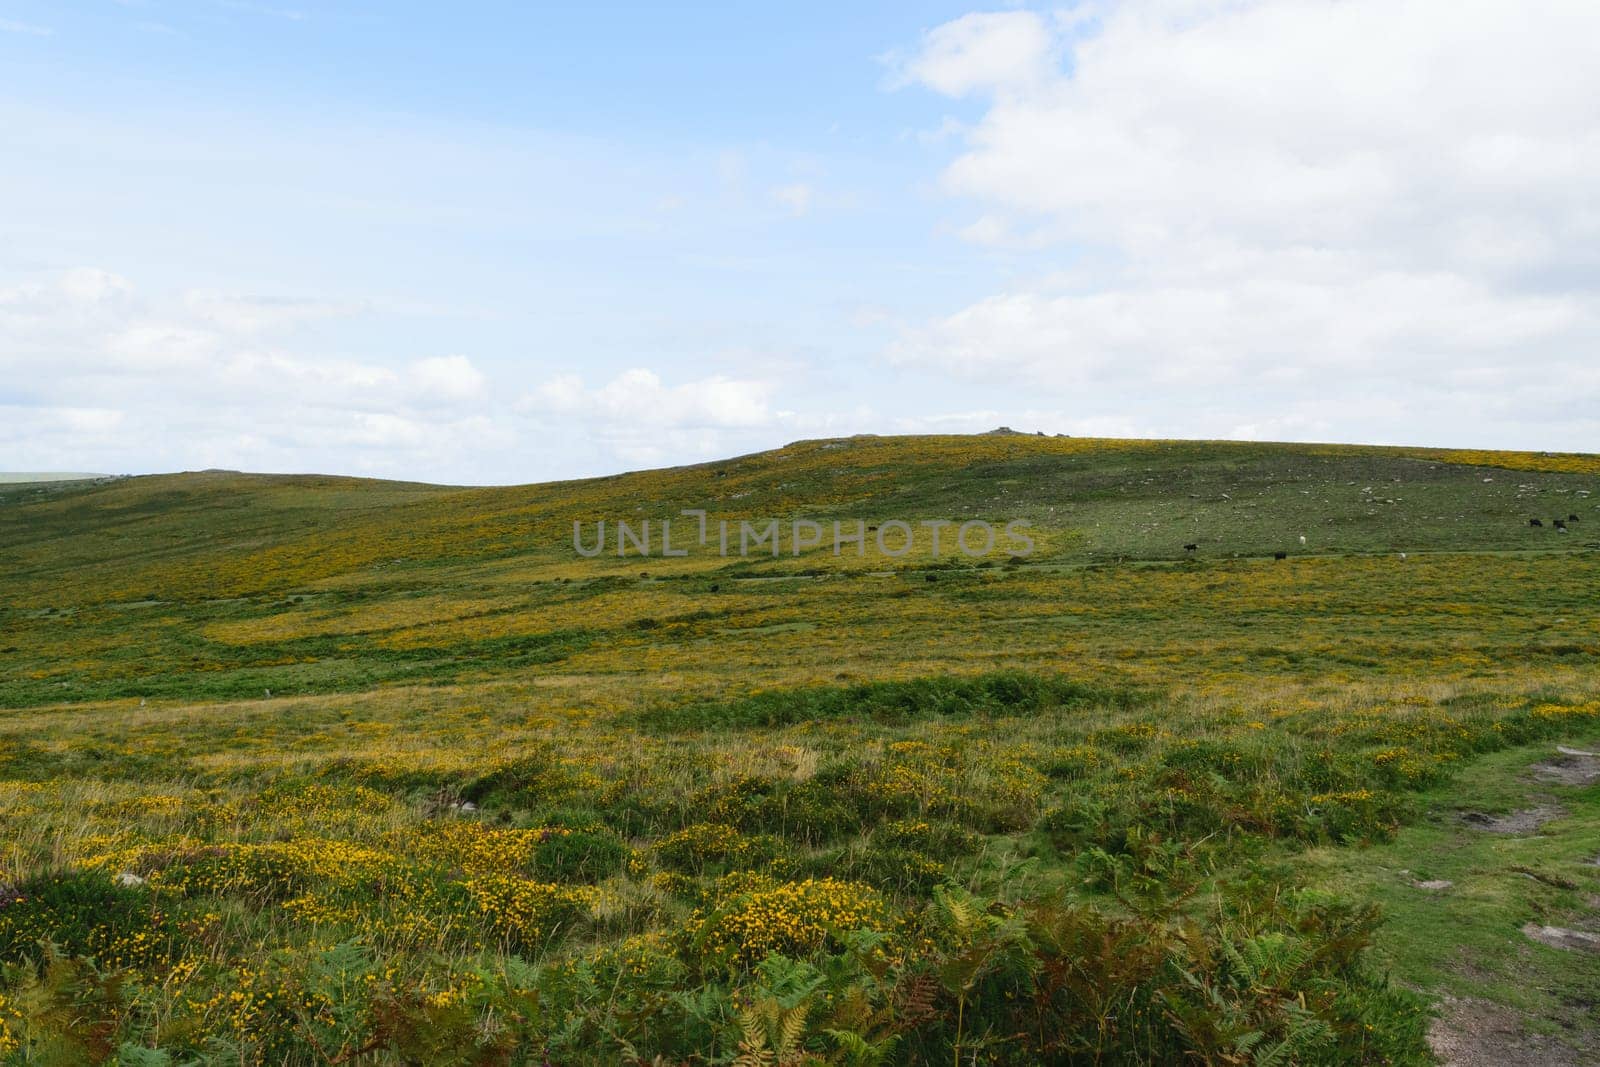 A scenic view of a grassy hillside covered with yellow wildflowers under a partly cloudy sky.